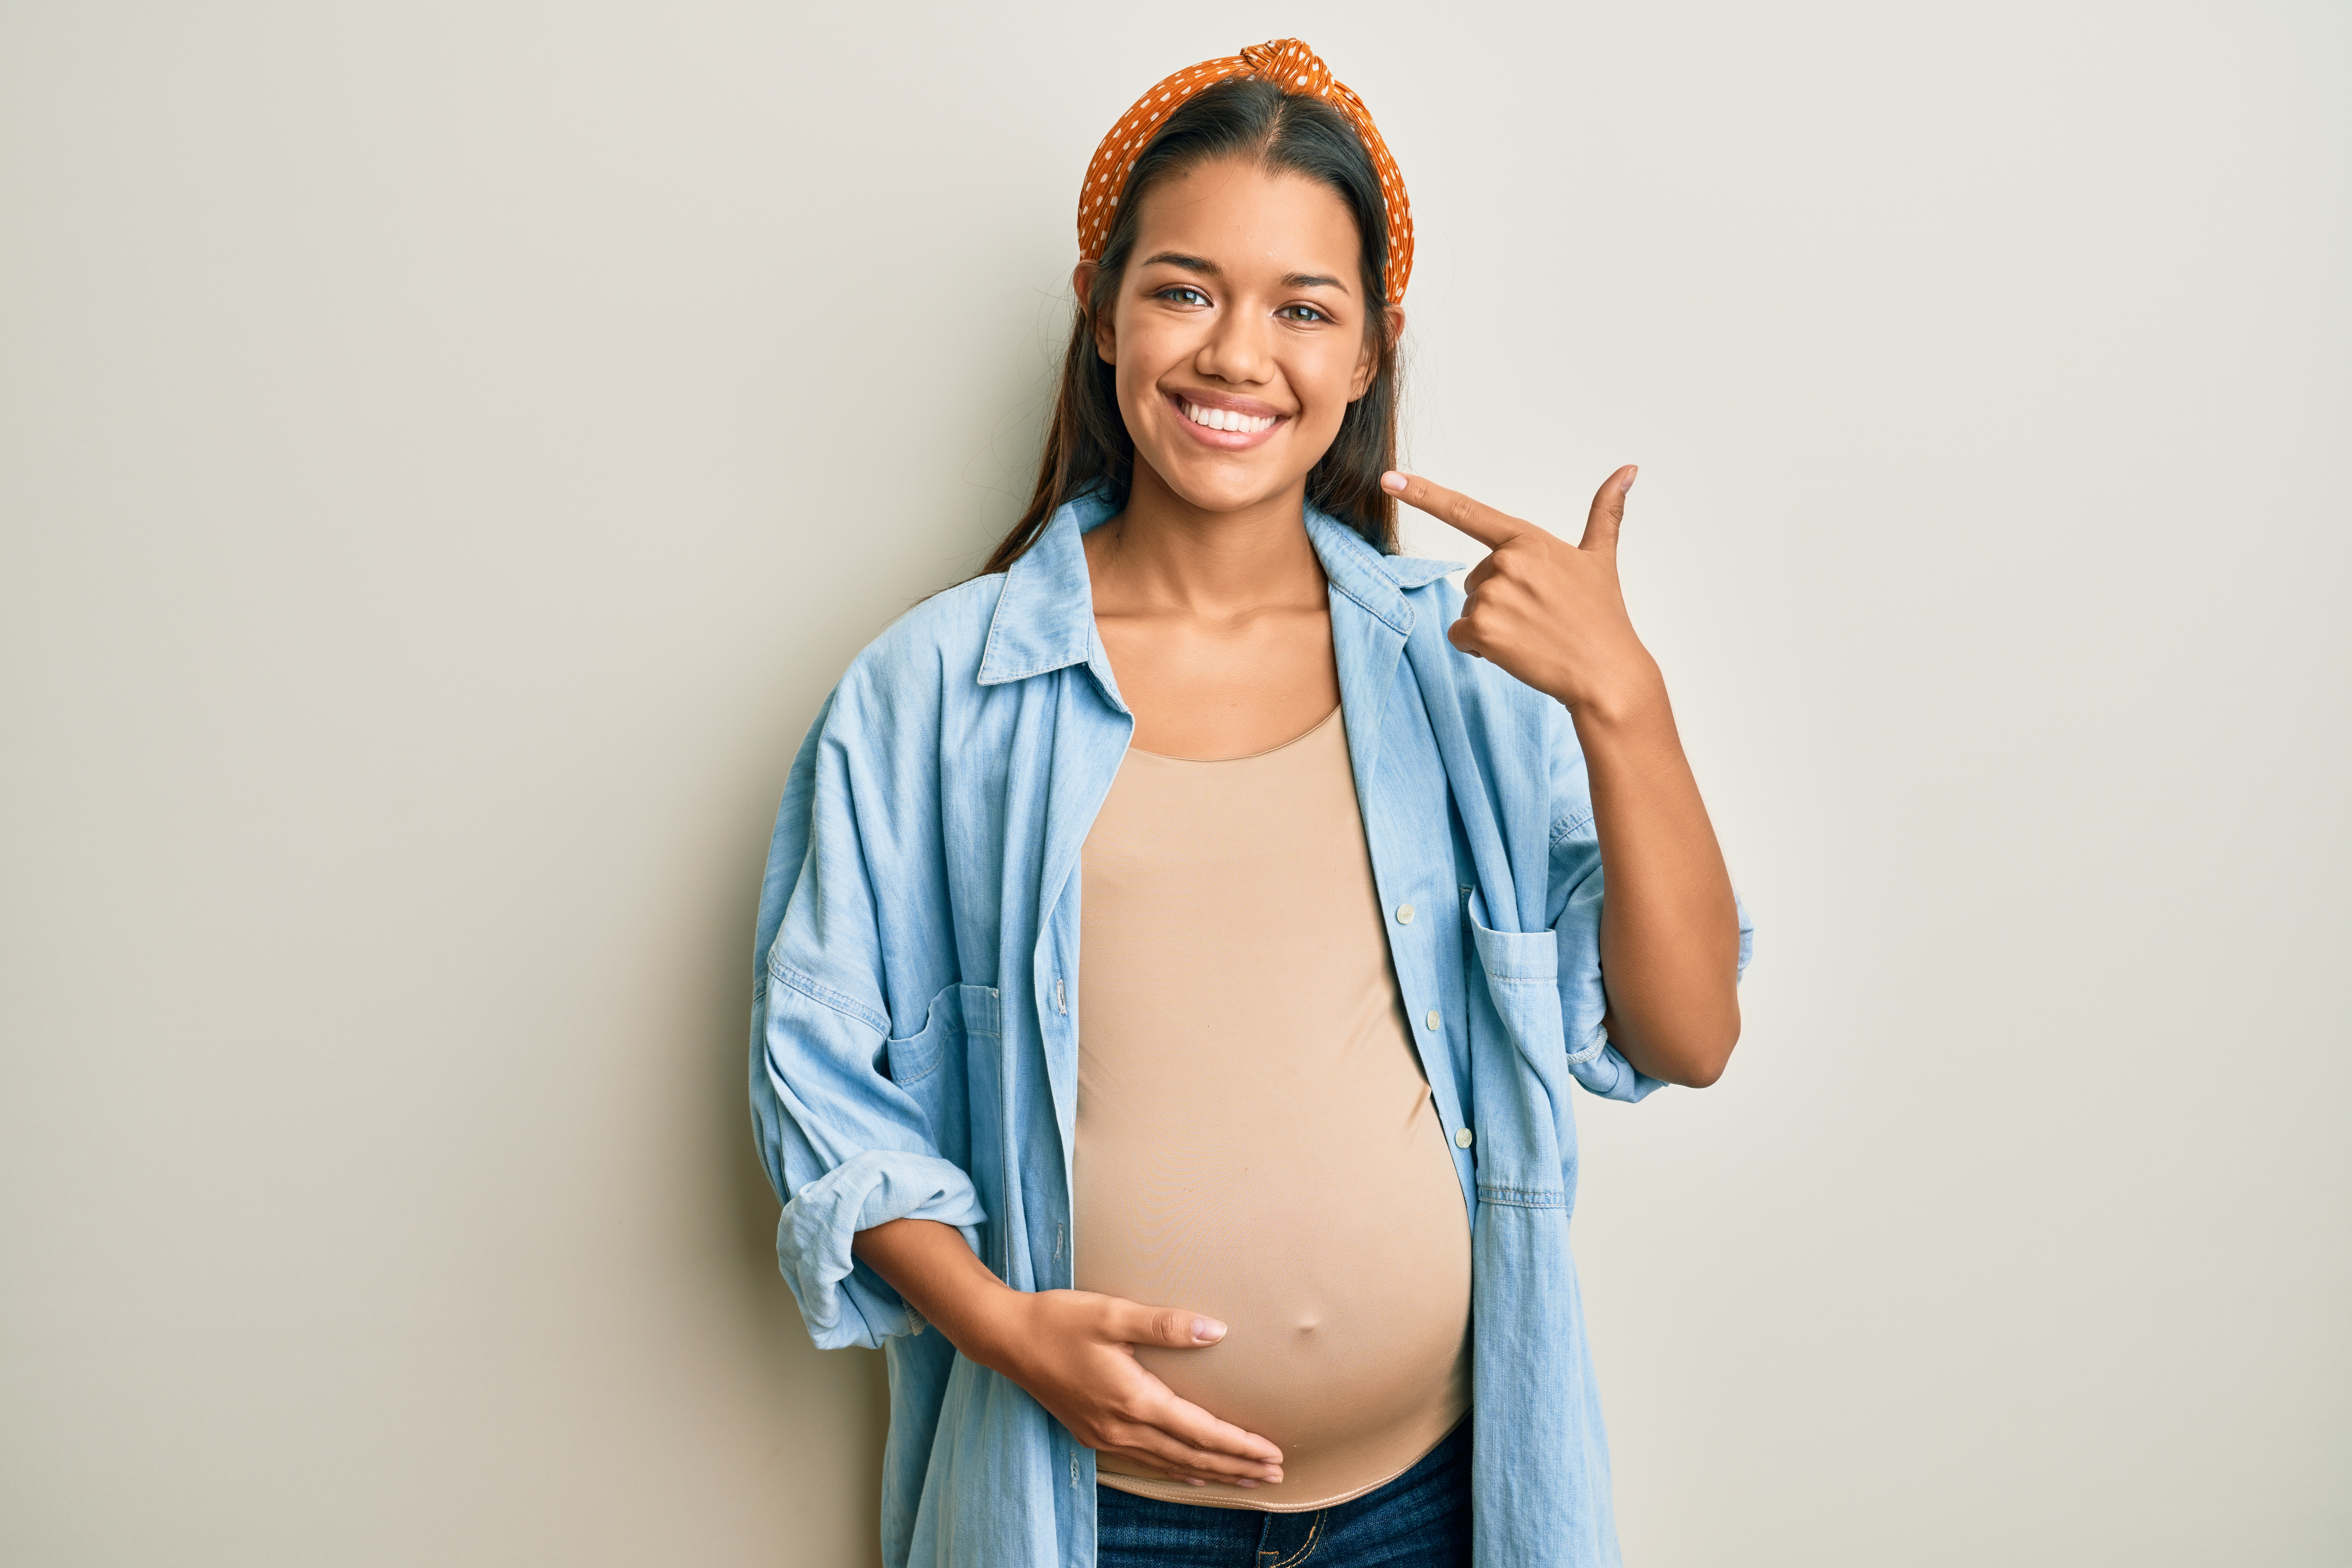 A pregnant woman holding her stomach and pointing at her smile.